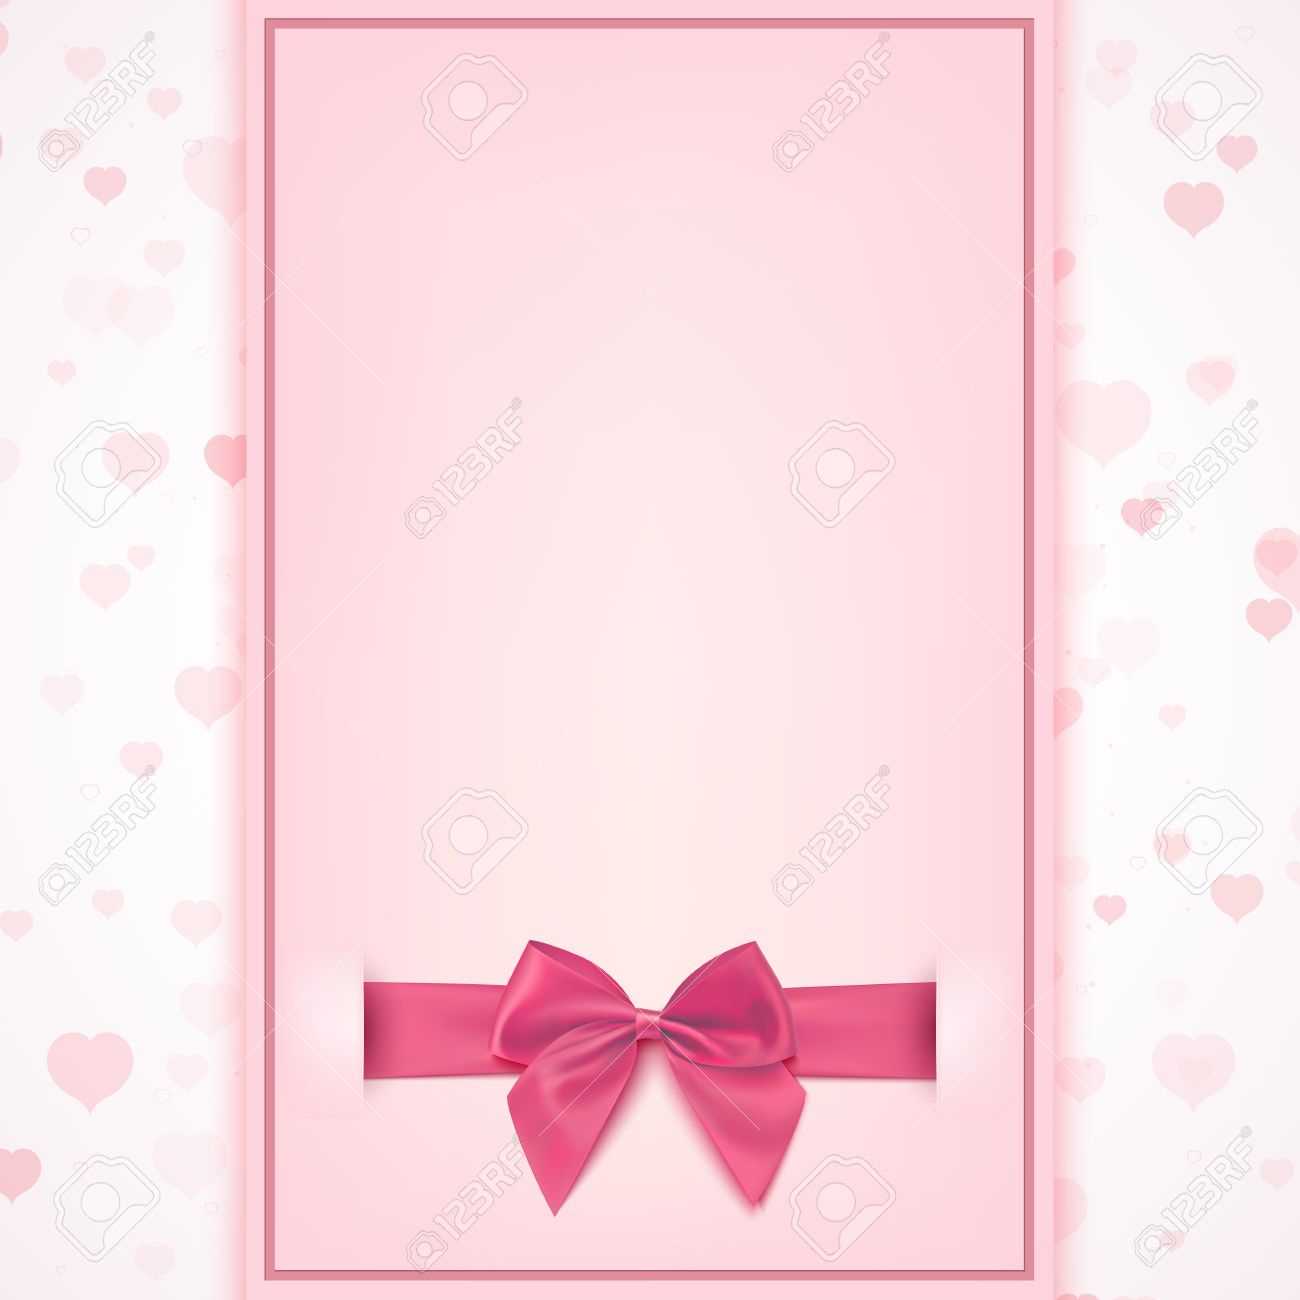 Blank Greeting Card Template For Baby Girl Shower Celebration,.. Pertaining To Free Printable Blank Greeting Card Templates